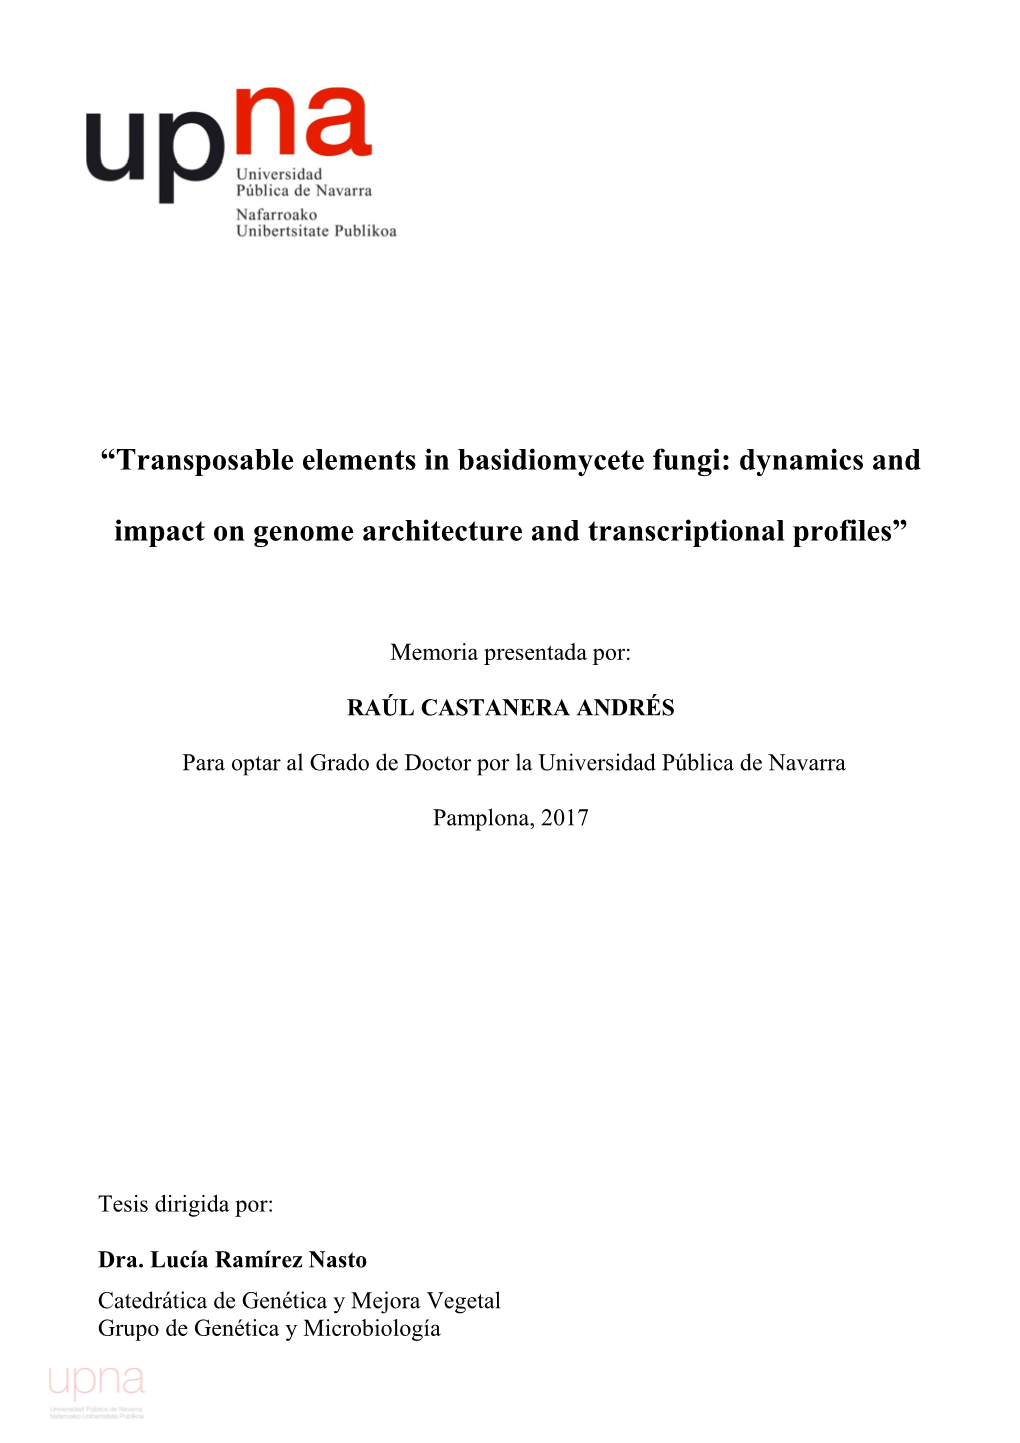 “Transposable Elements in Basidiomycete Fungi: Dynamics and Impact on Genome Architecture and Transcriptional Profiles” Elaborada Por D